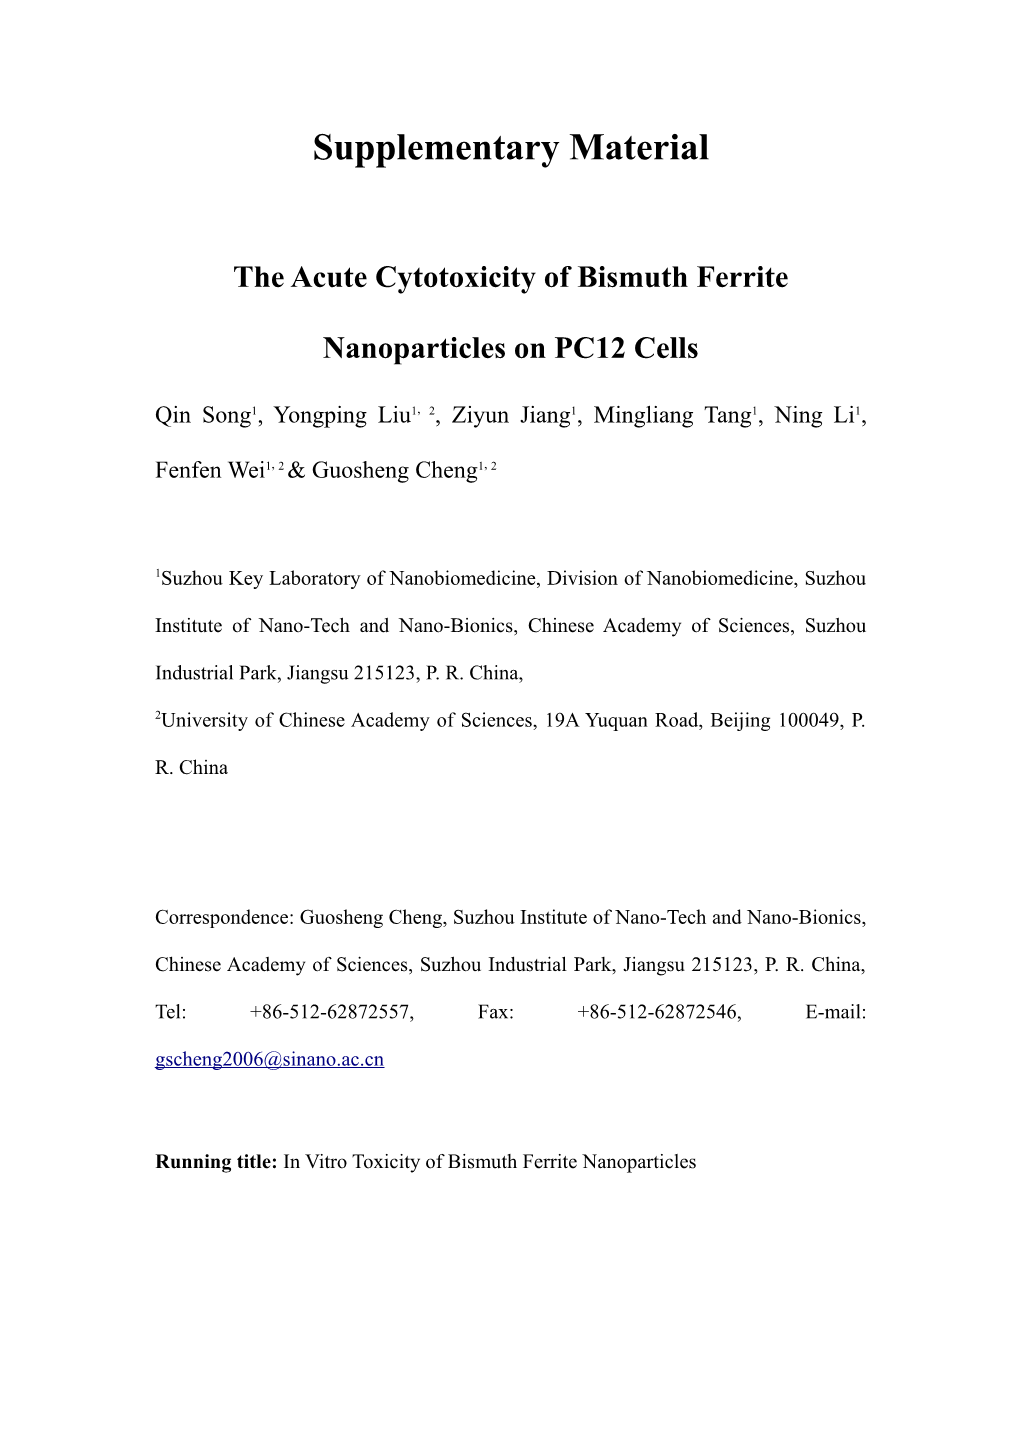 The Acute Cytotoxicity of Bismuth Ferrite Nanoparticleson PC12 Cells